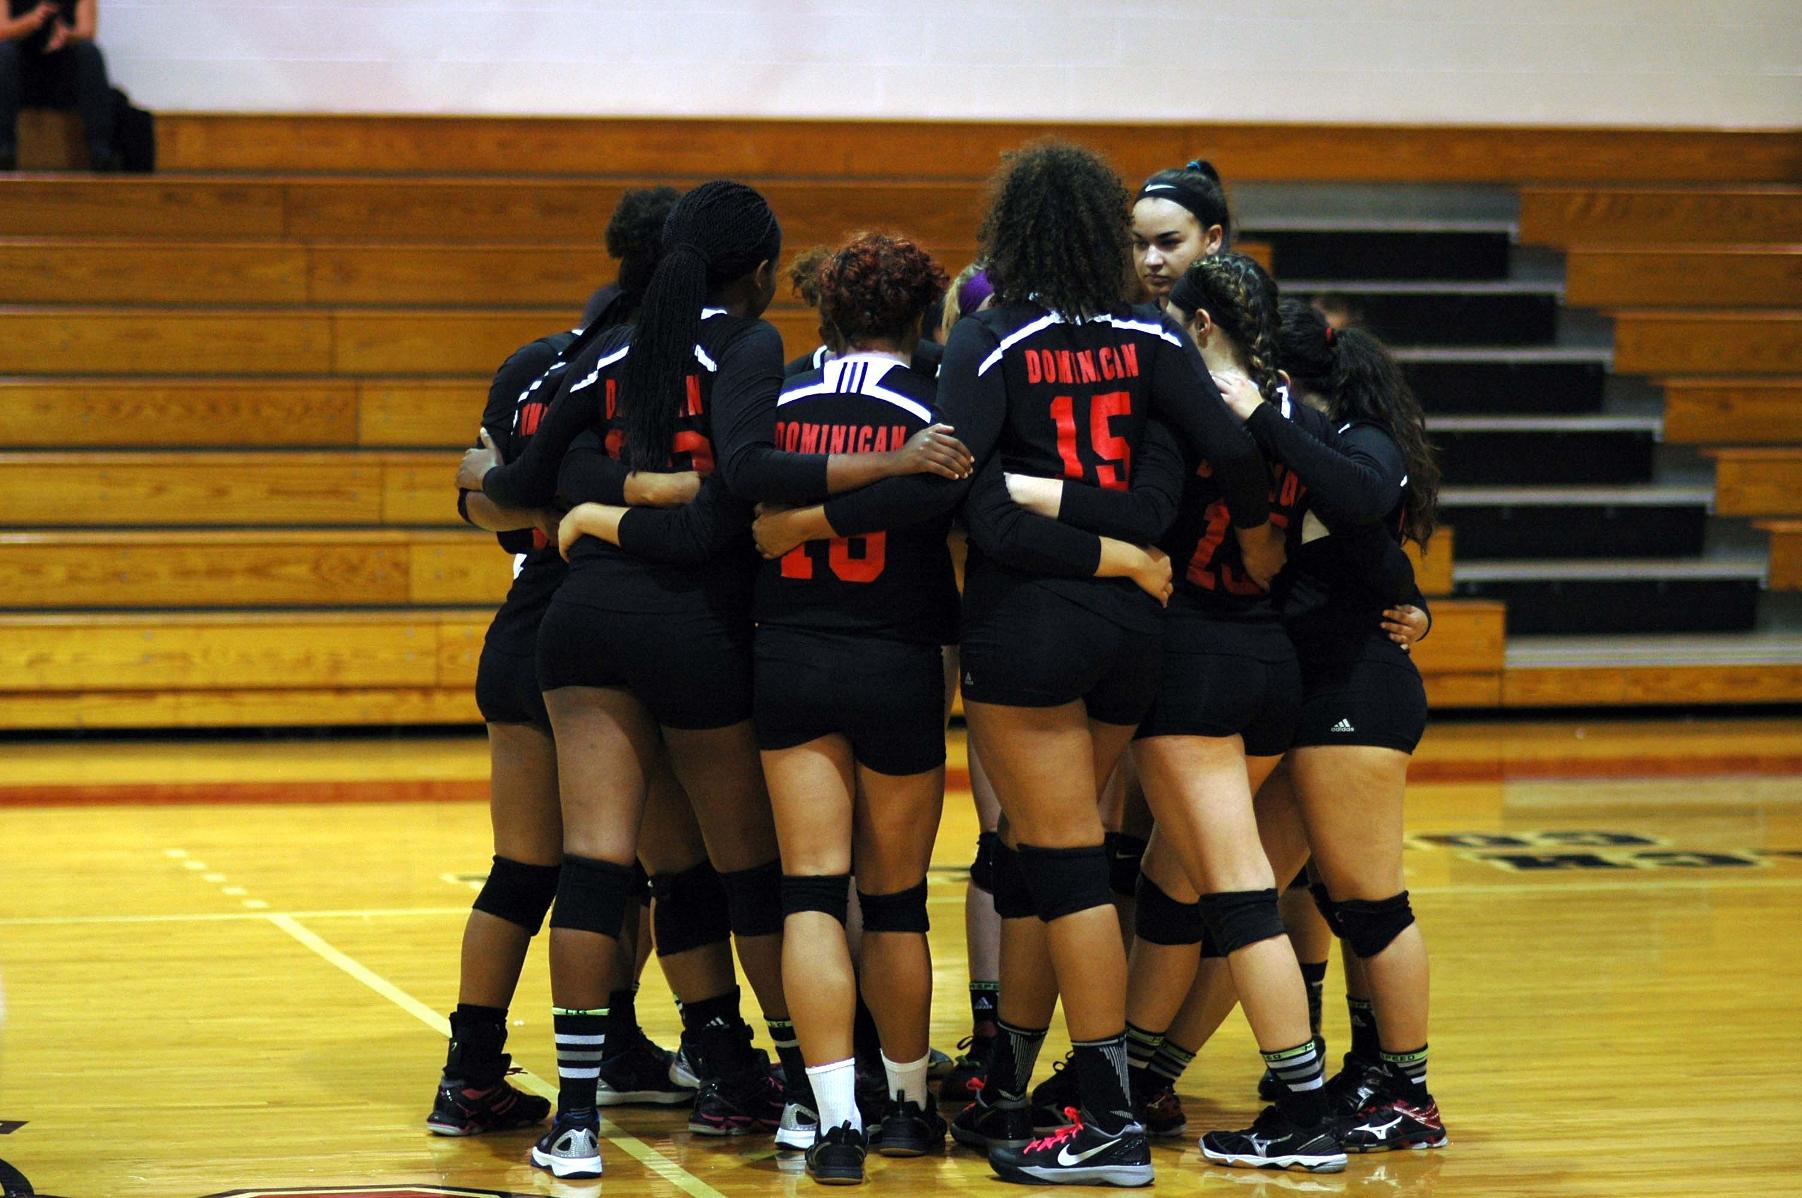 LADY CHARGERS DROPS NON-CONFERENCE MATCH TO BLOOMFIELD COLLEGE